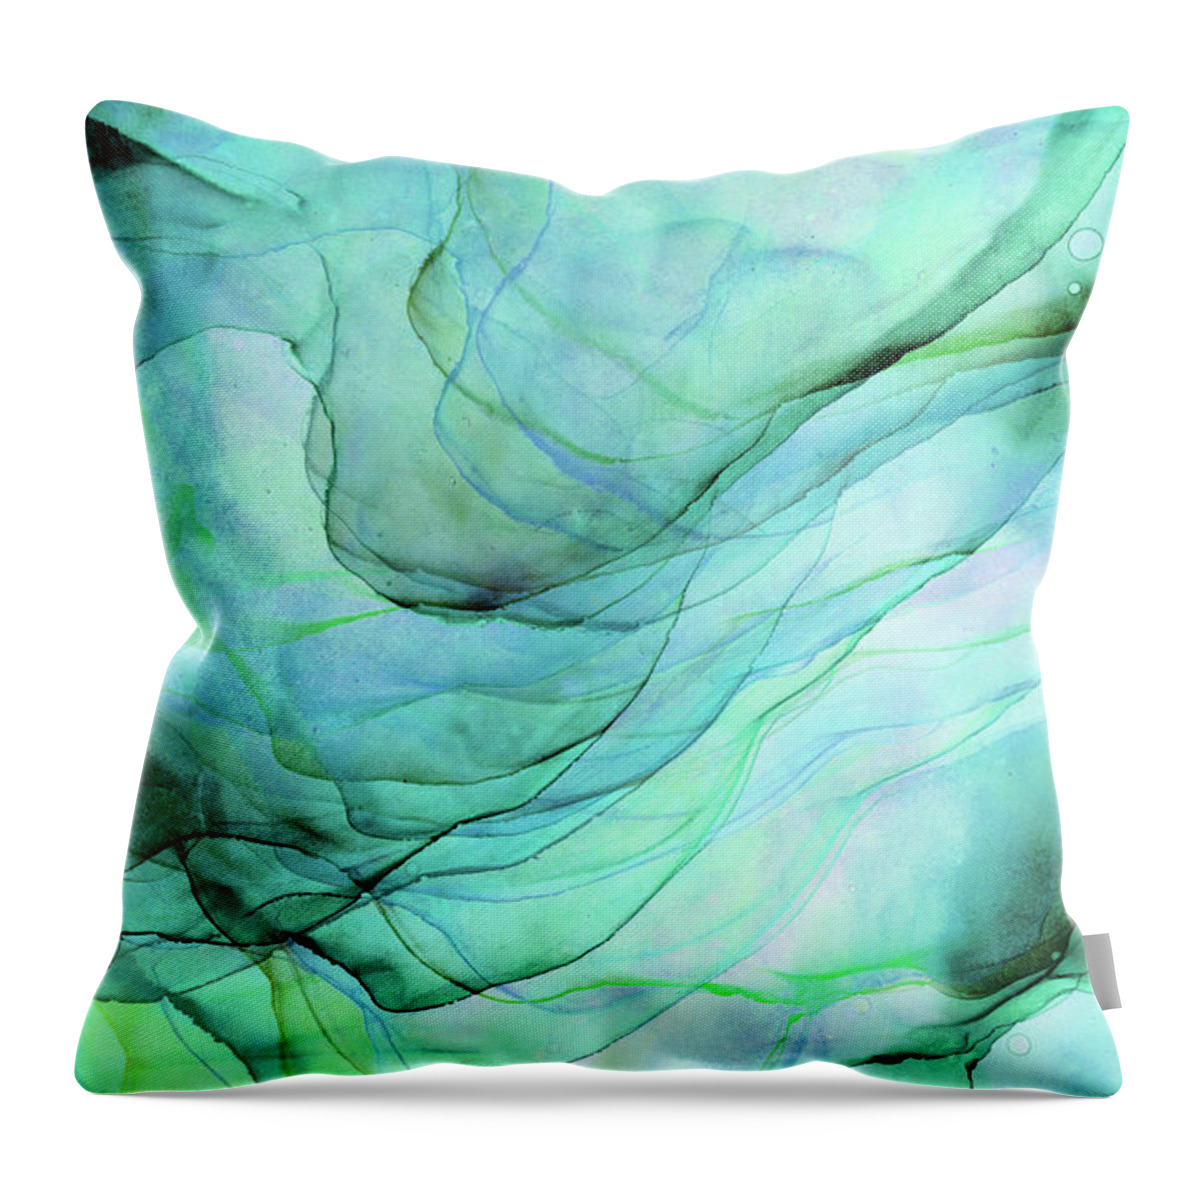 Sea Green Throw Pillow featuring the painting Sea Green Flowing Abstract Ink by Olga Shvartsur